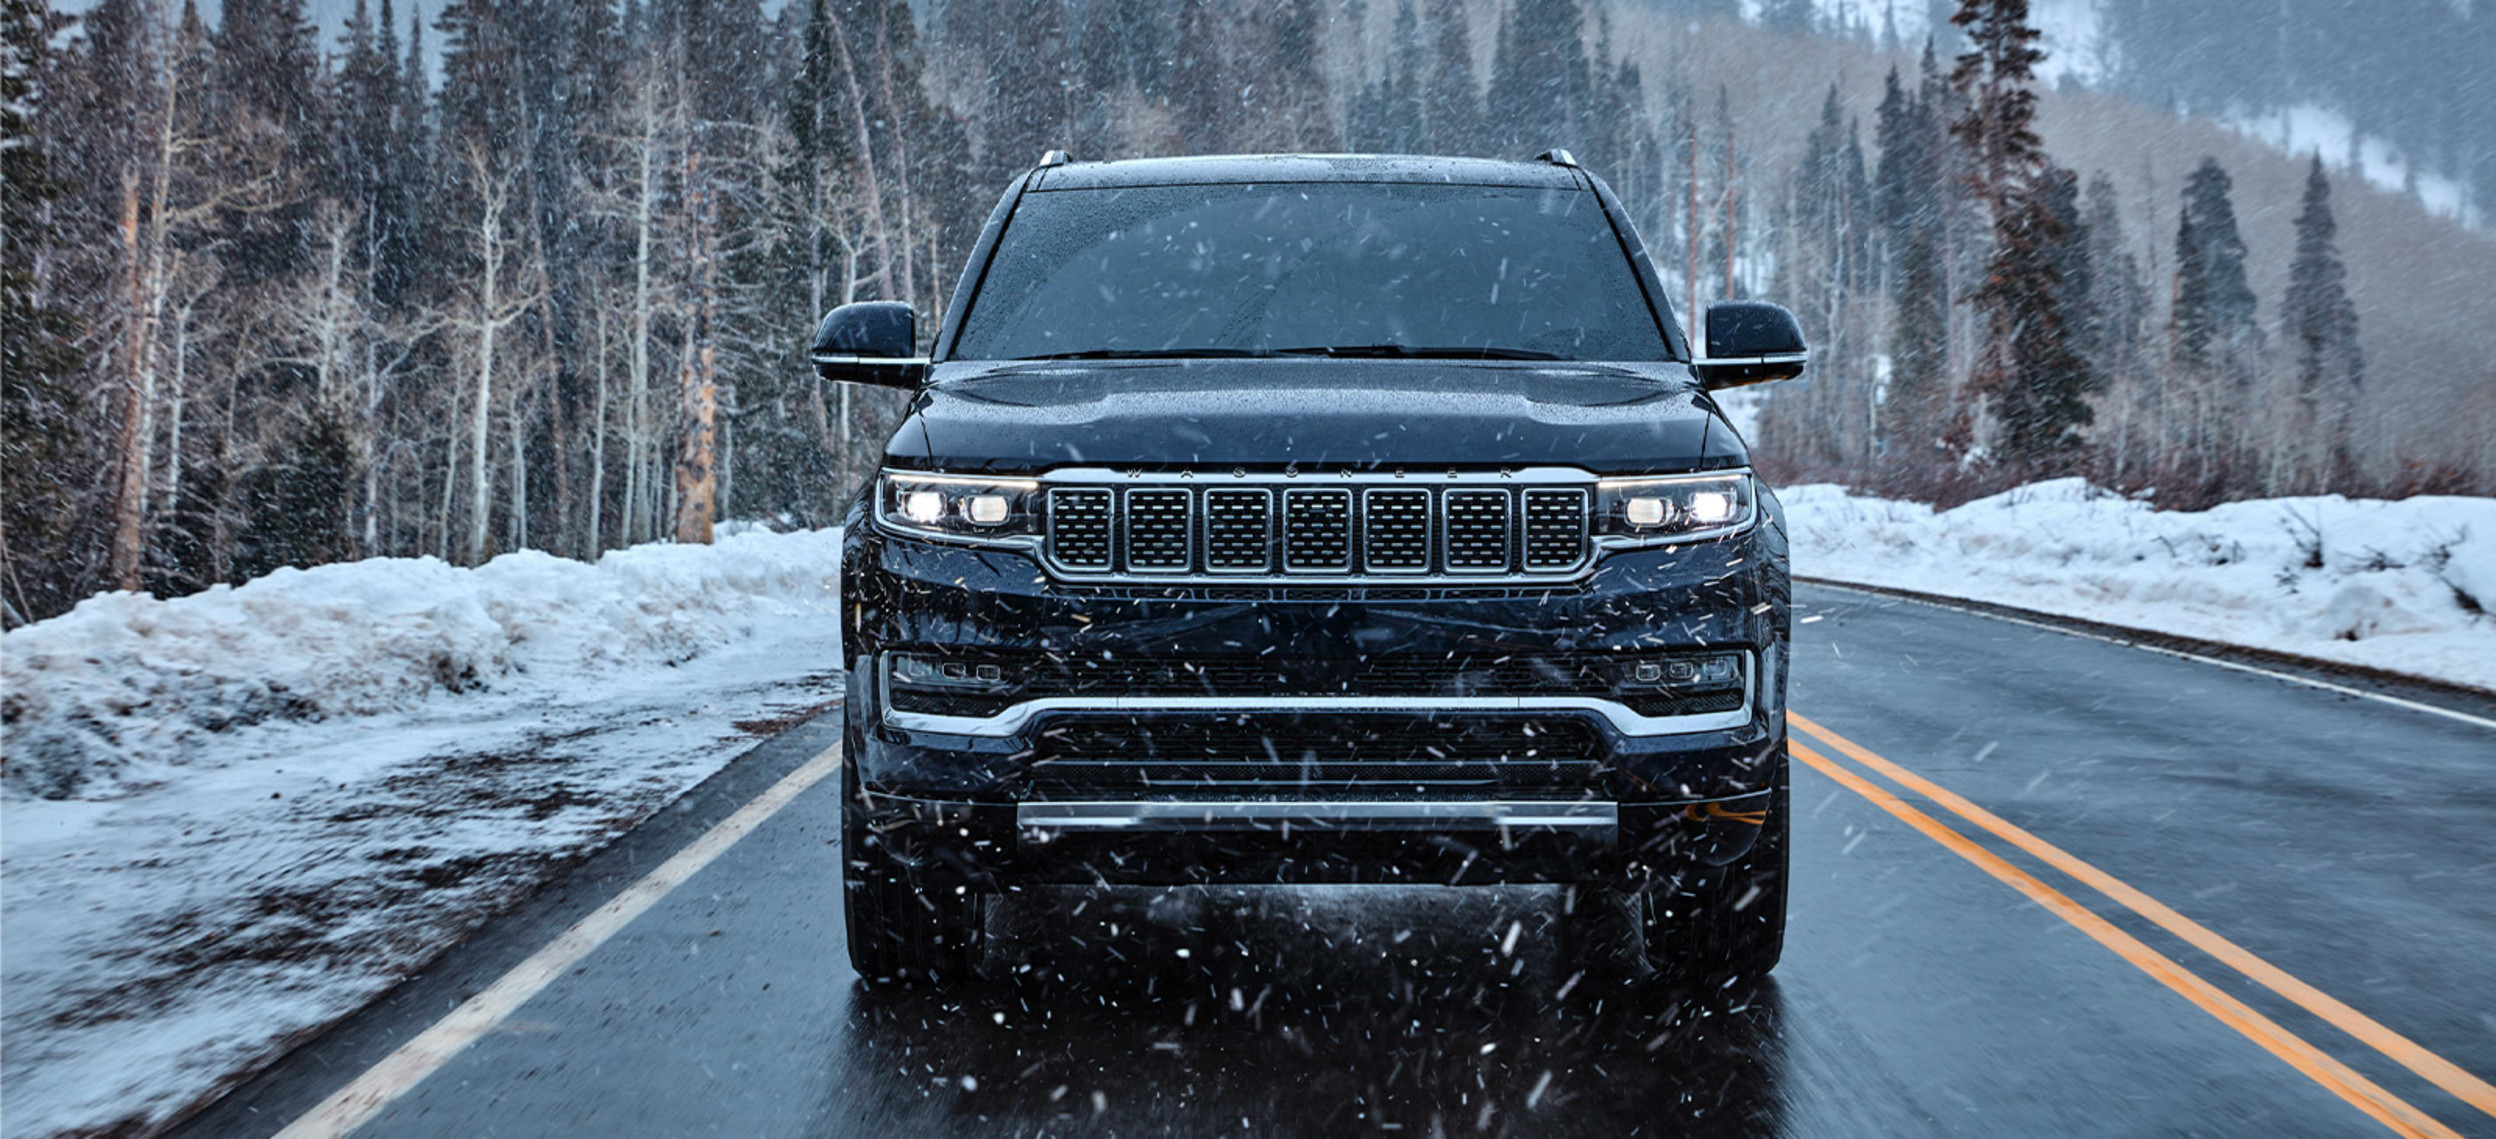 Front view of a 2022 black Grand Wagoneer, being driven on a snowy road in the moutains